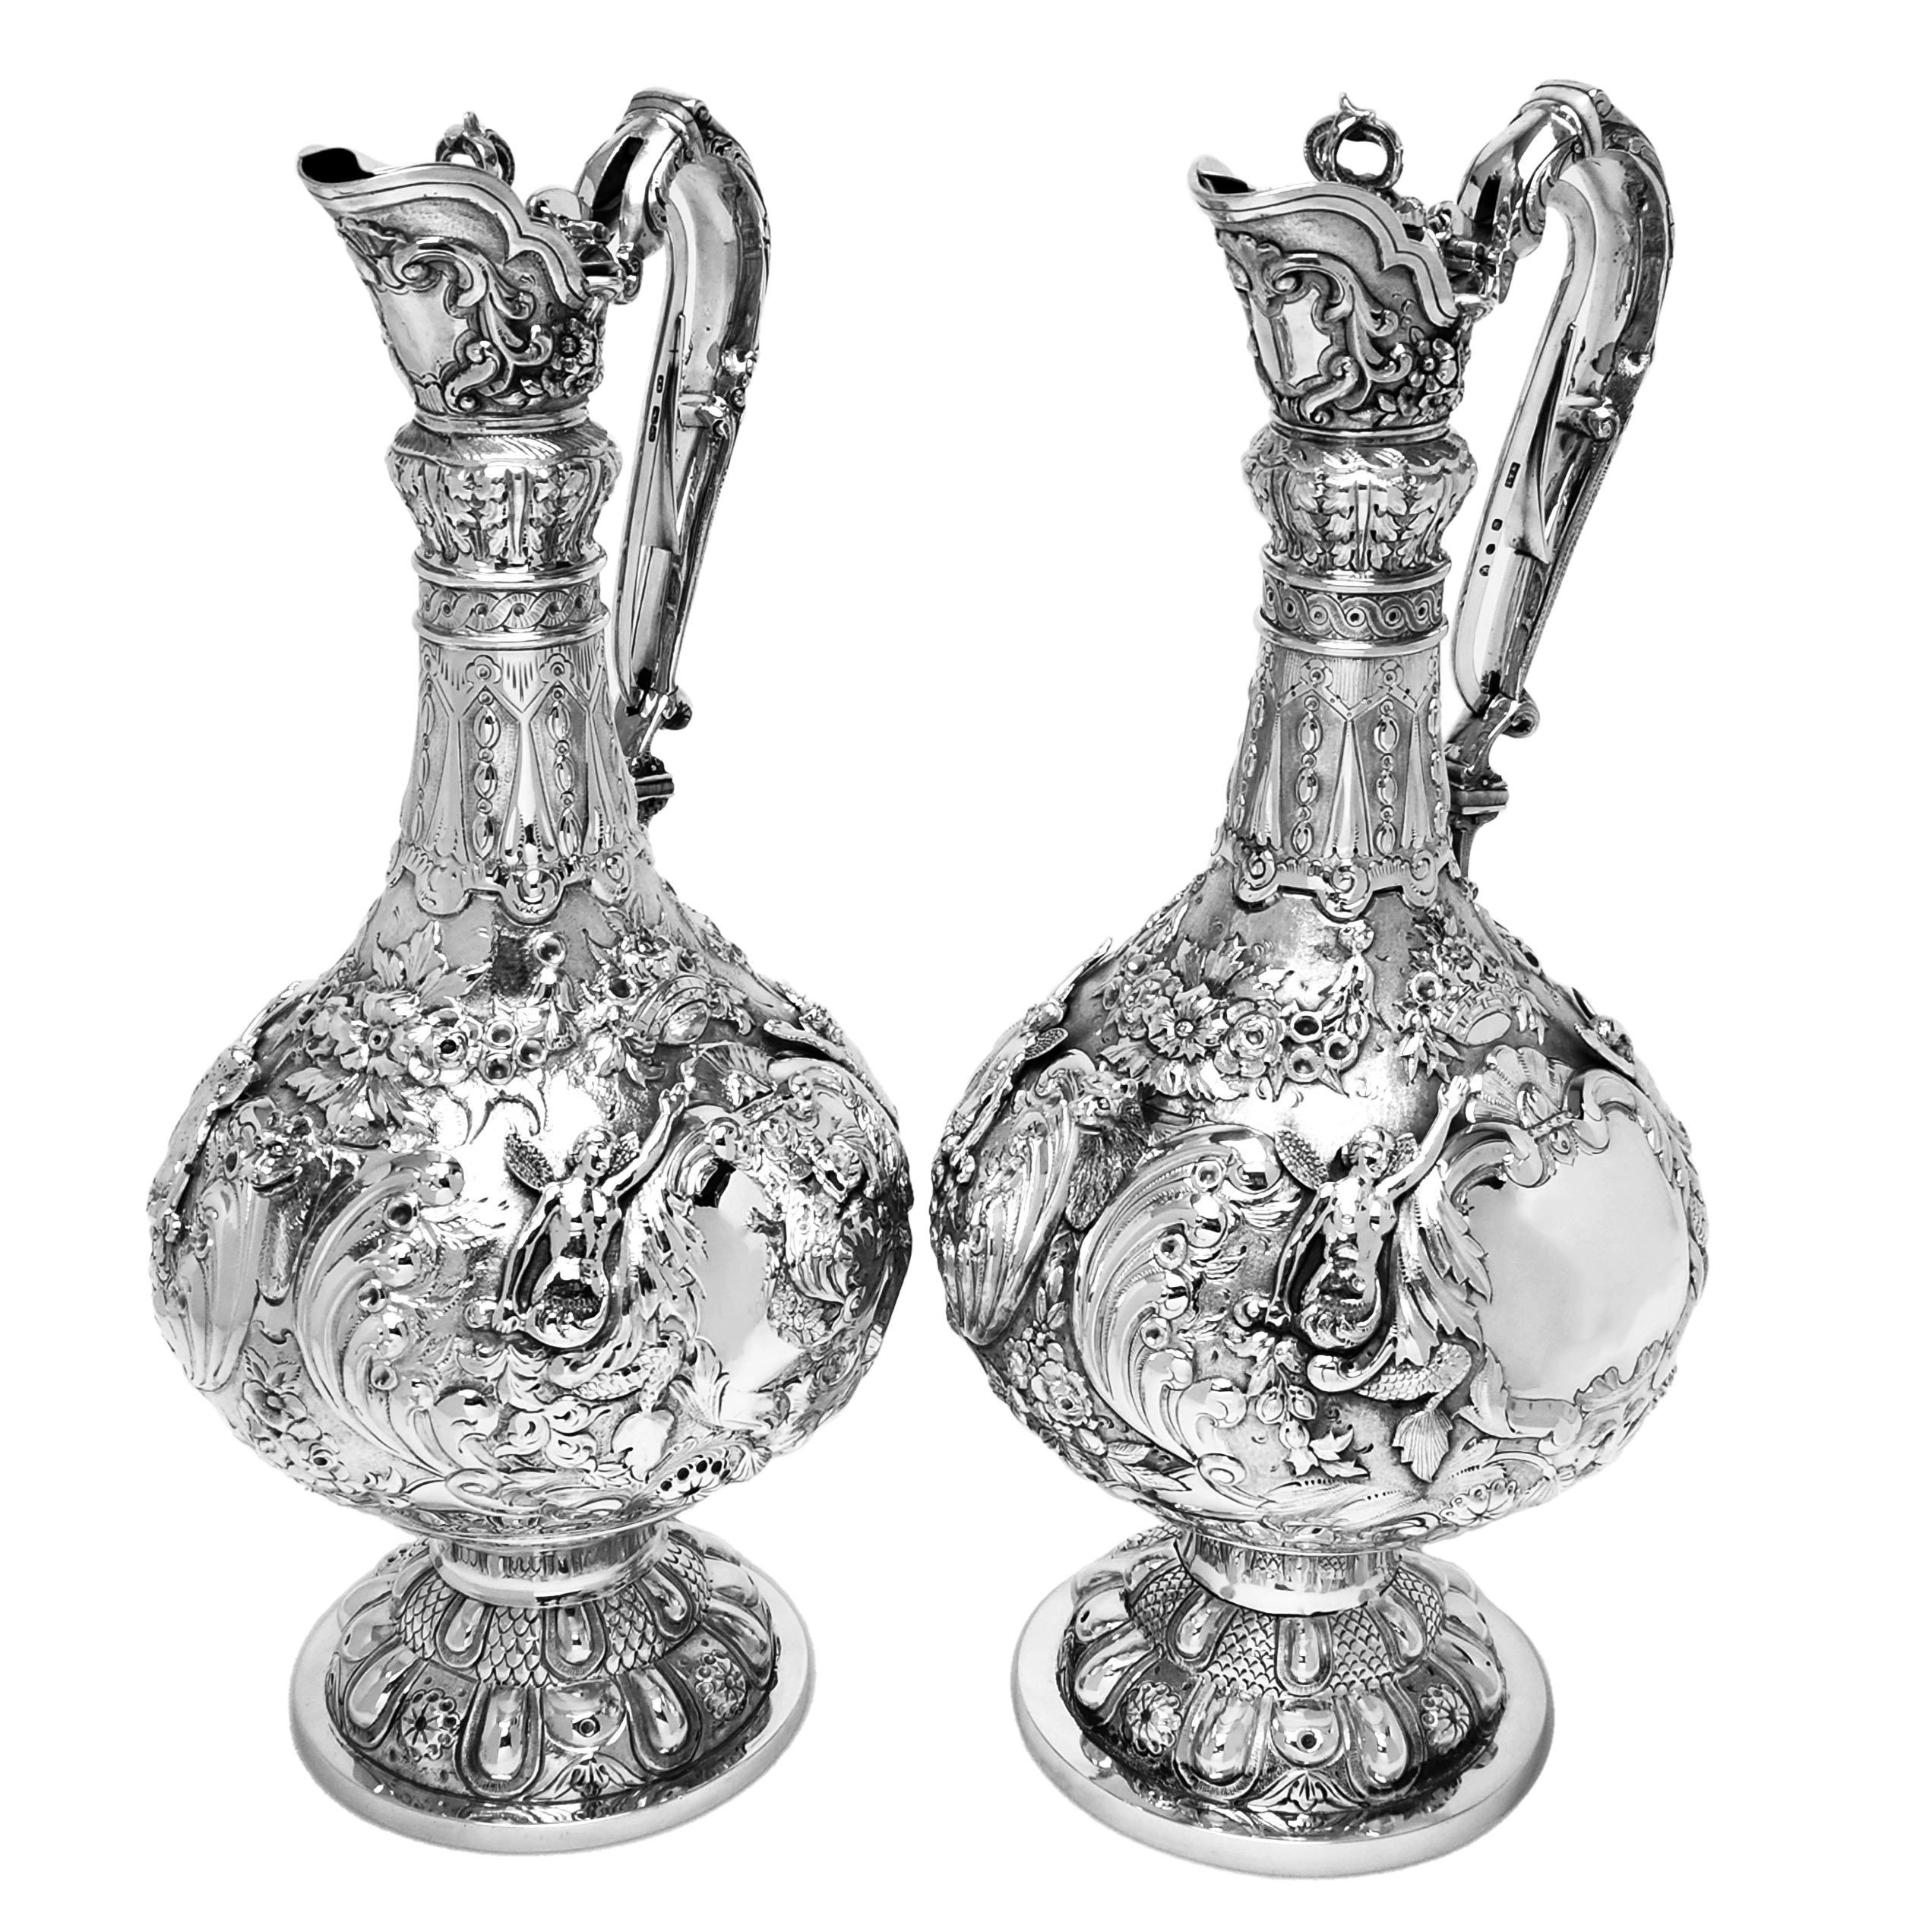 An impressive pair of Antique Irish sterling silver Claret jugs in a traditional Armada Style. This matched pair of Armada Wine Ewers feature rich and ornate chased and applied detailing over the entire body of the jug. These chased decorative